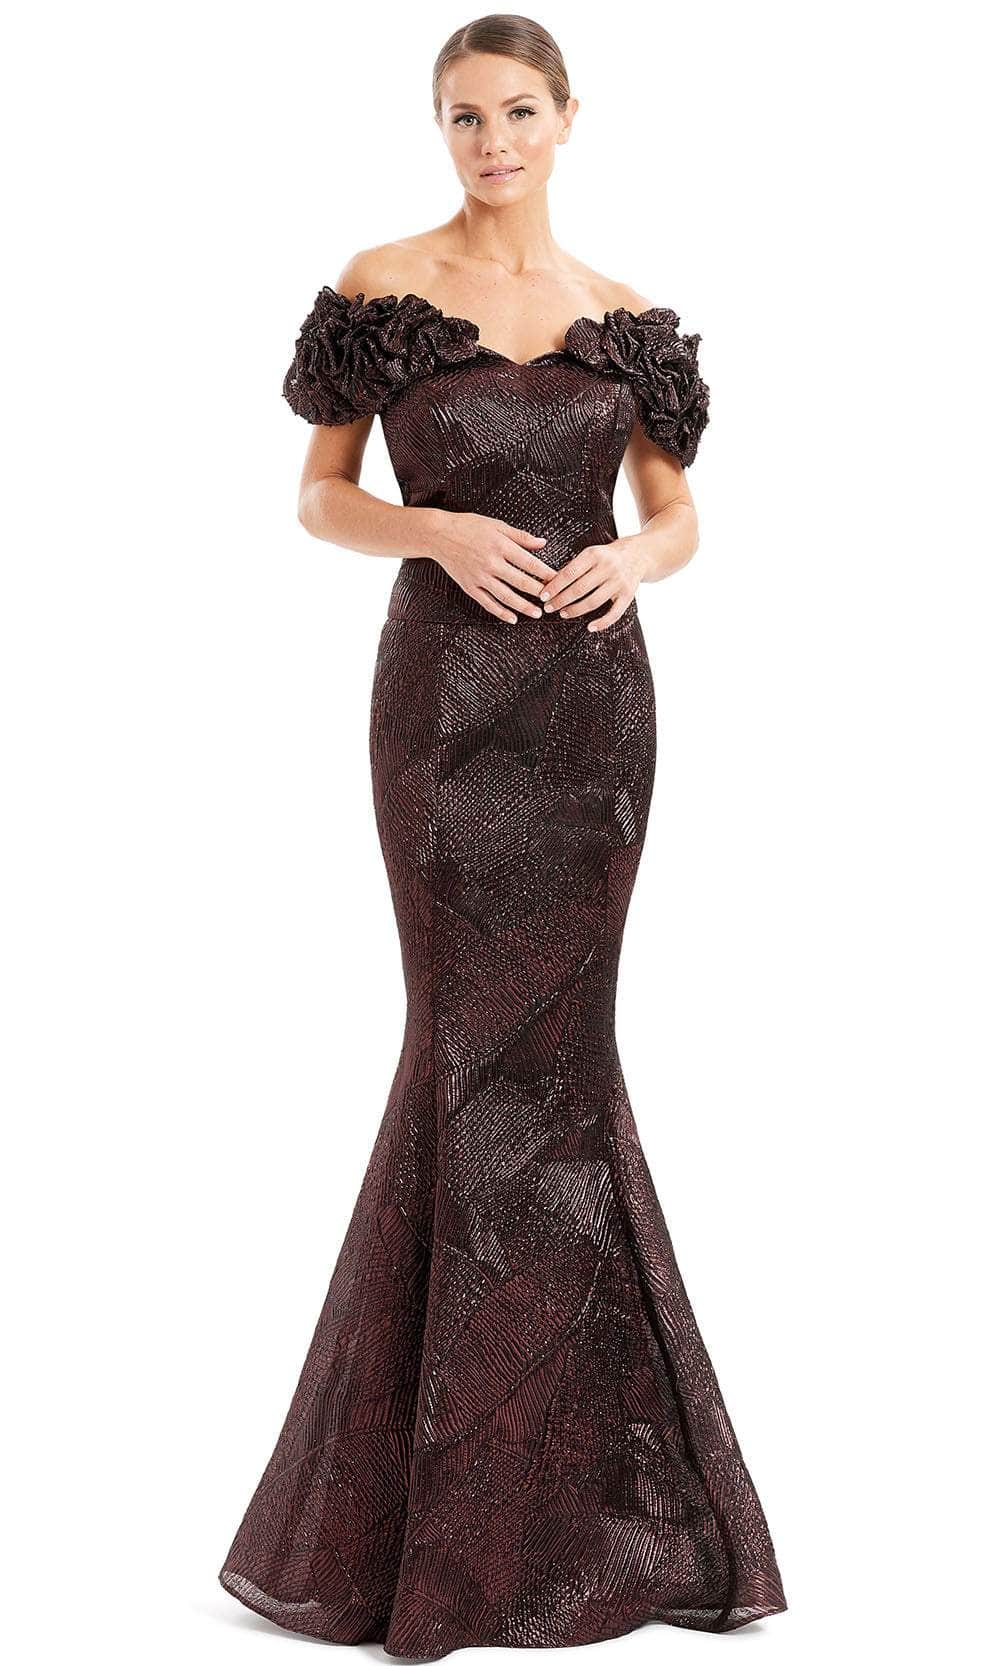 Alexander By Daymor 1650F22 - Ruffled Sleeve Metallic Evening Gown Special Occasion Dress